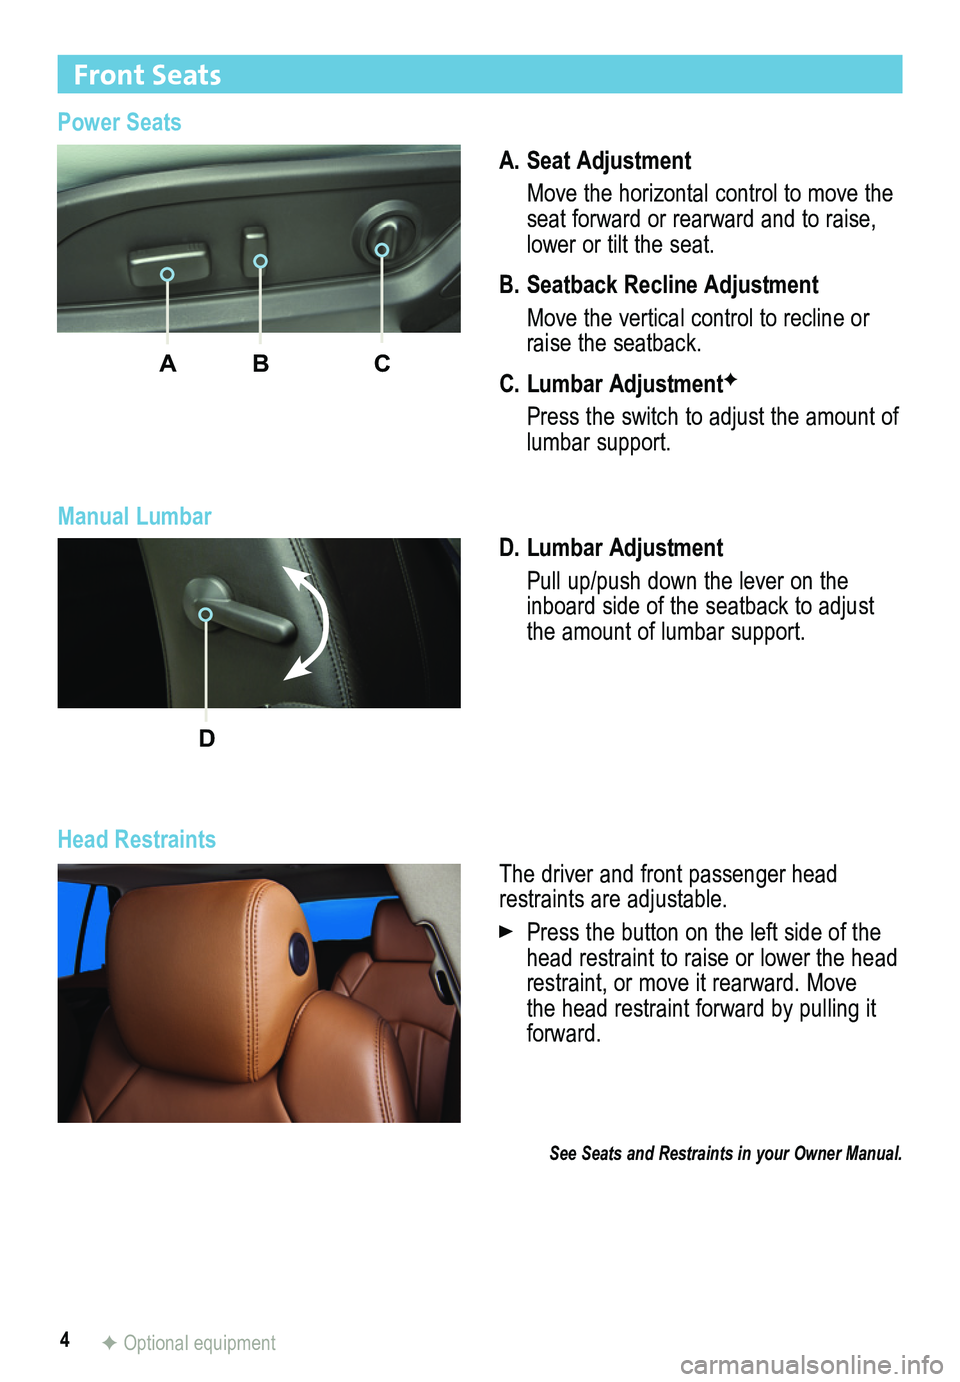 BUICK ENCLAVE 2014  Get To Know Guide 4
Front Seats 
A. Seat Adjustment
 Move the horizontal control to move the seat forward or rearward and to raise, lower or tilt the seat.
B. Seatback Recline Adjustment 
 Move the vertical control to 